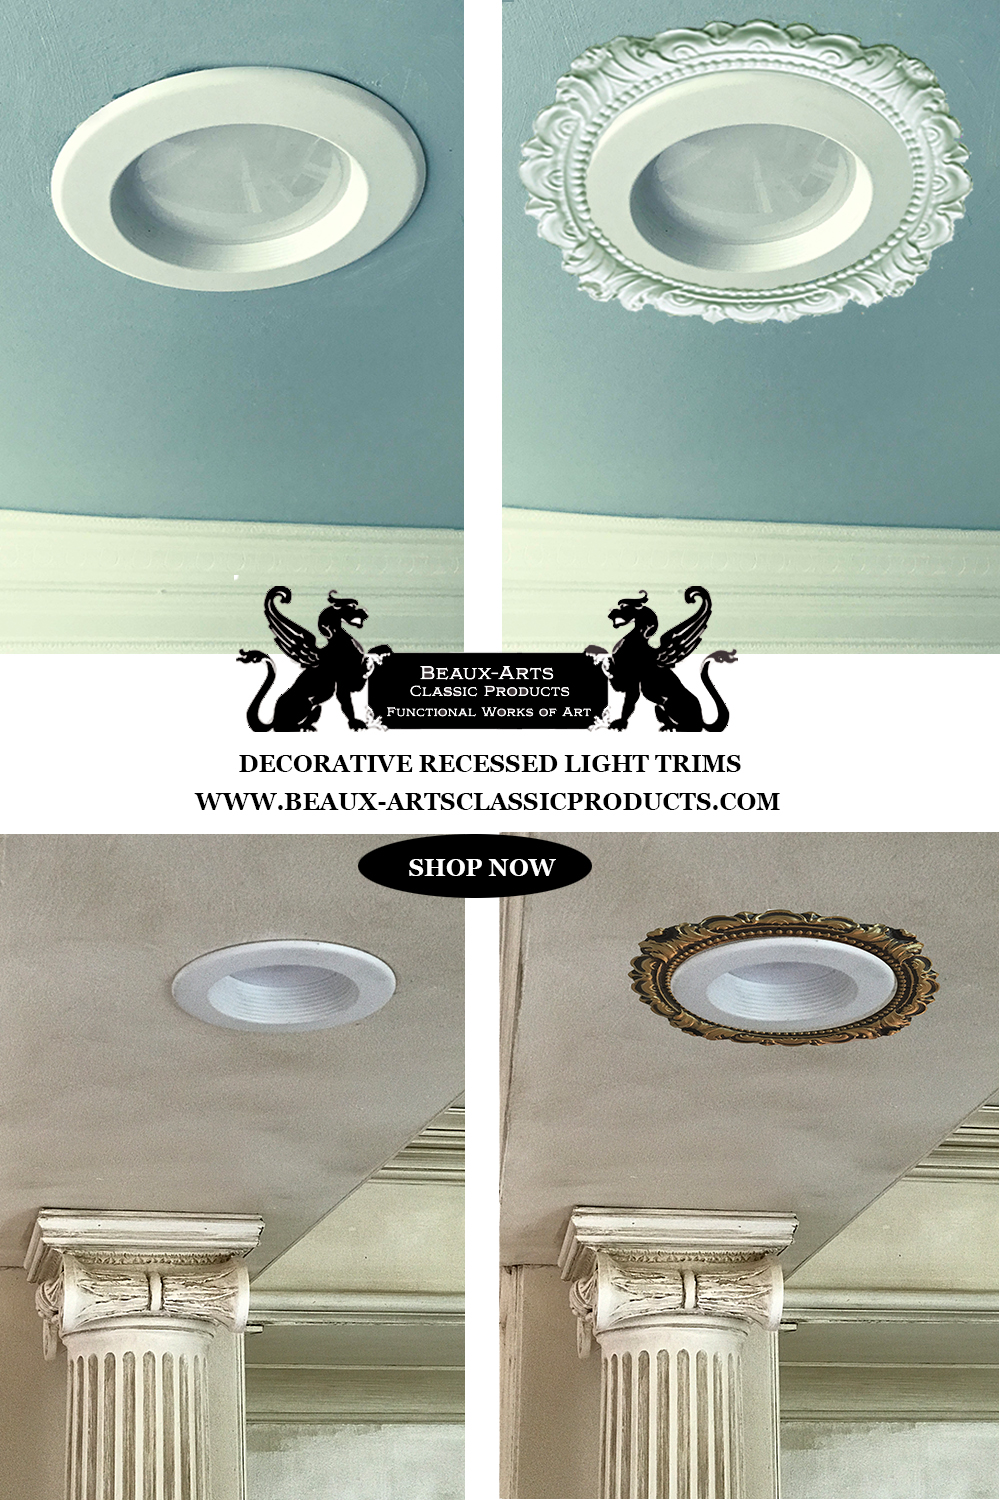 Before and after pictures of our decorative recessed light trims.